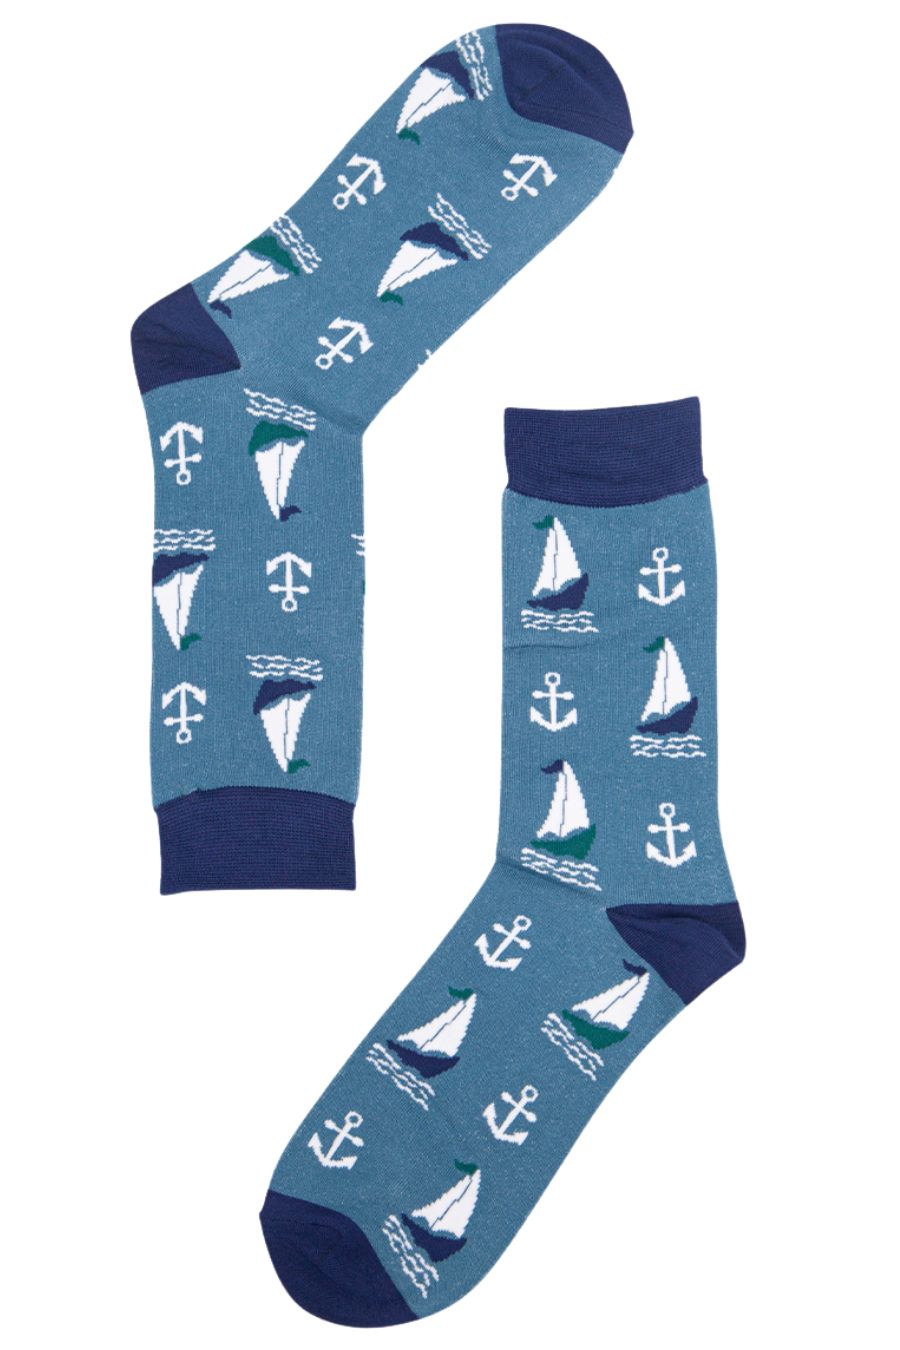 Blue bamboo socks lying flat, they have an all over pattern of white sail boats and anchors.